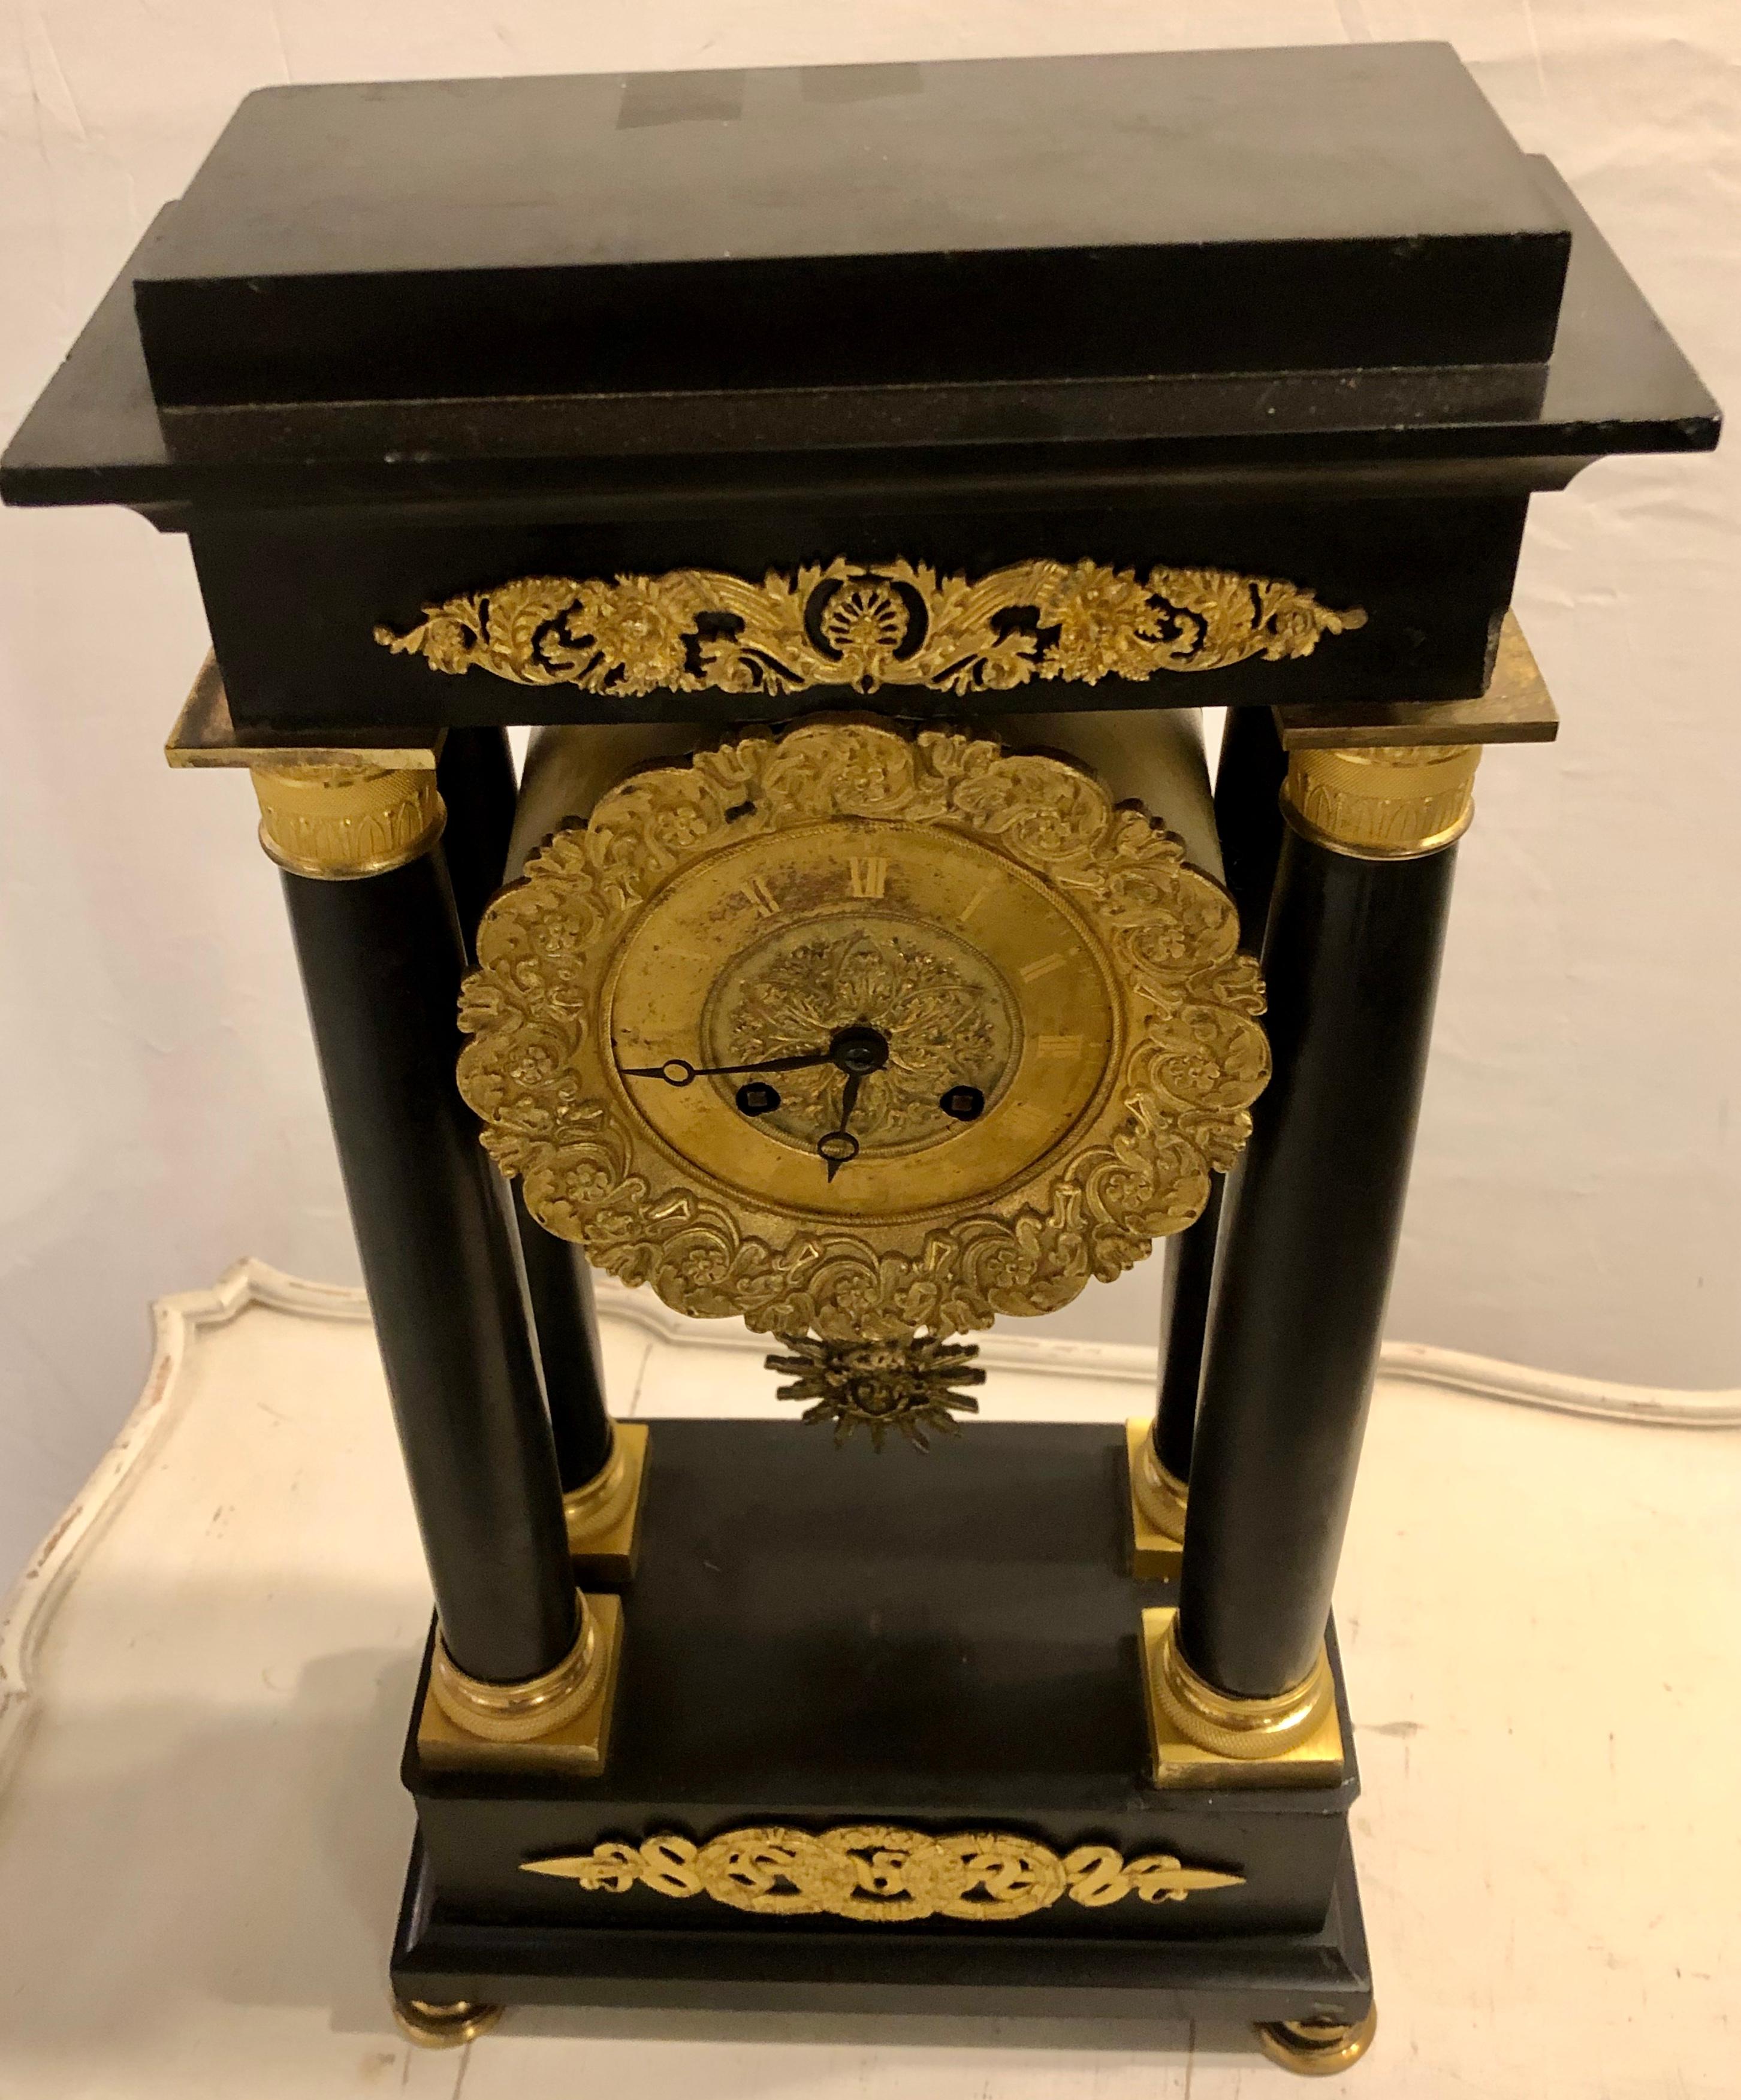 20th Century Empire Marble and Bronze Mantel Clock, Working